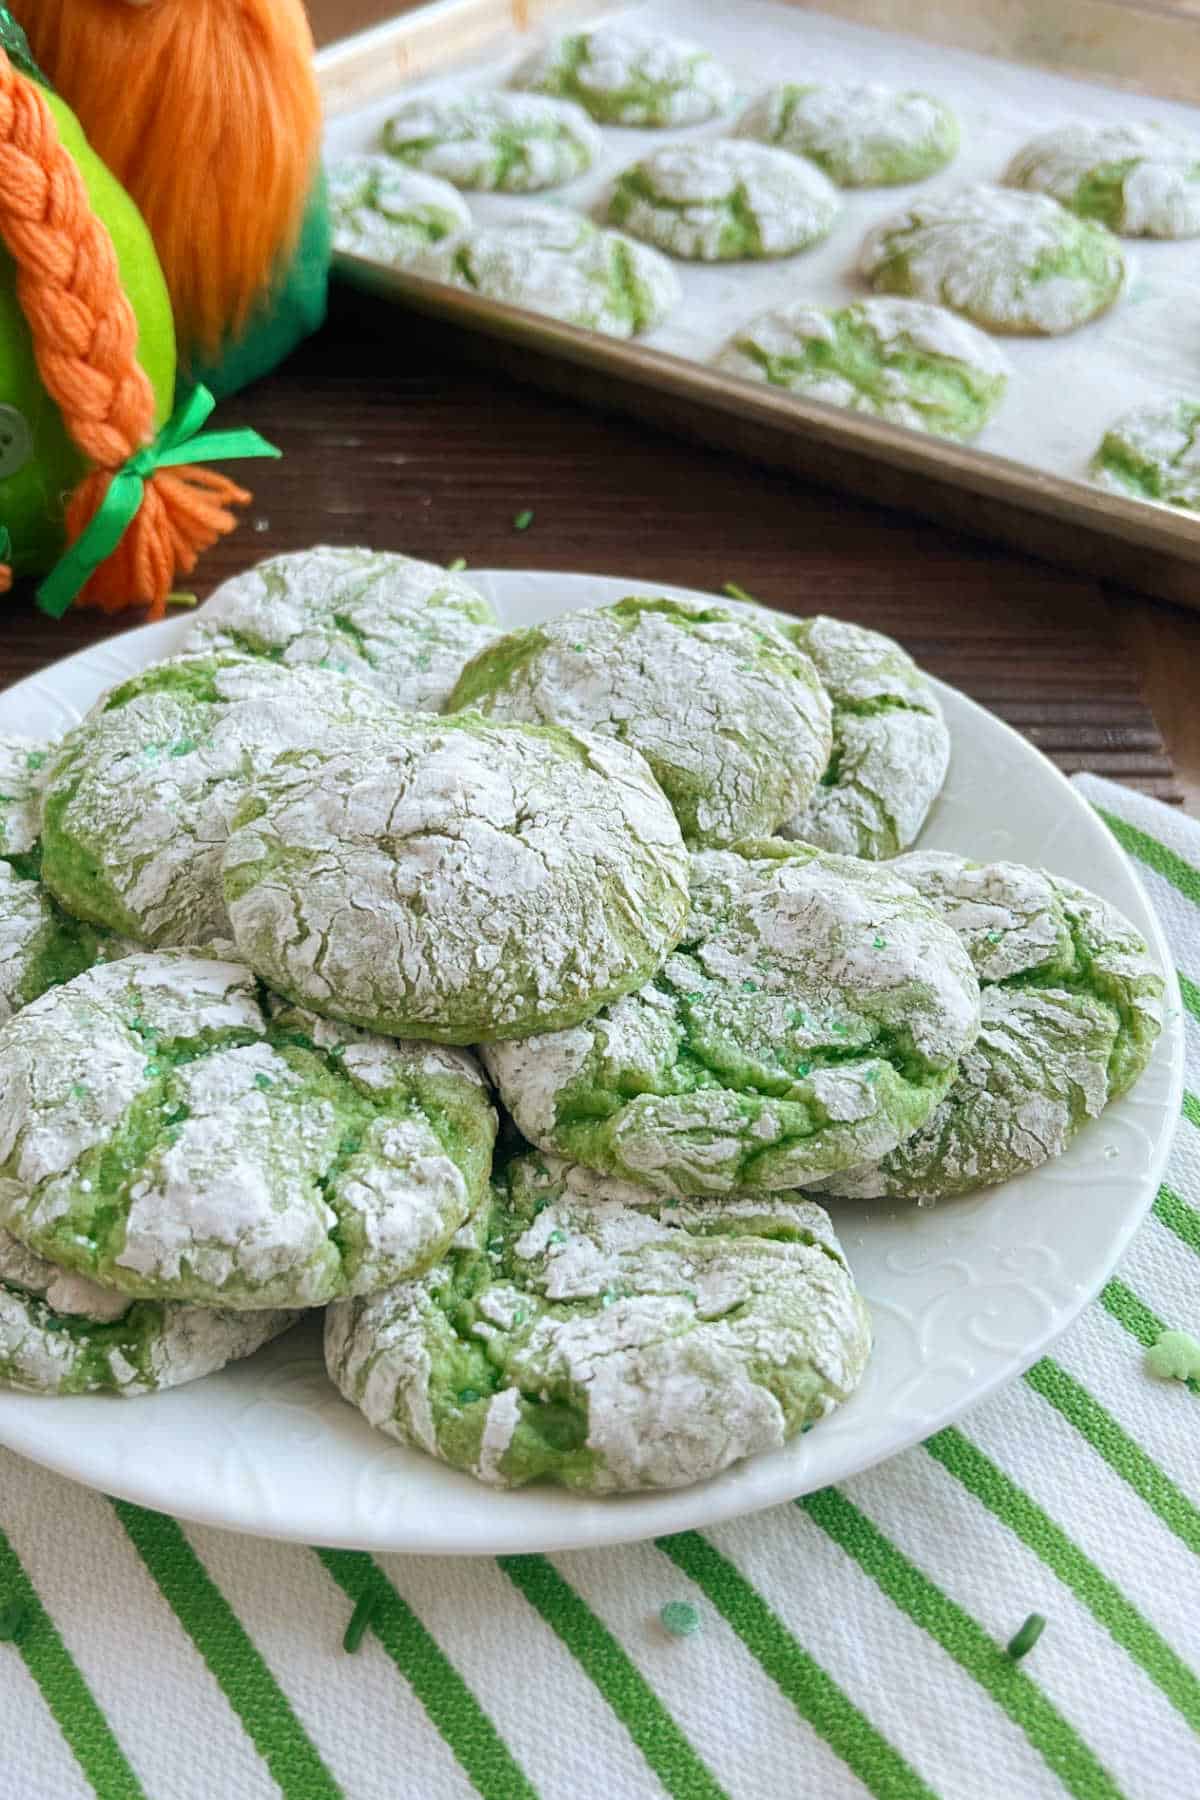 Green St. Patrick's Day crinkle cookies on the table.